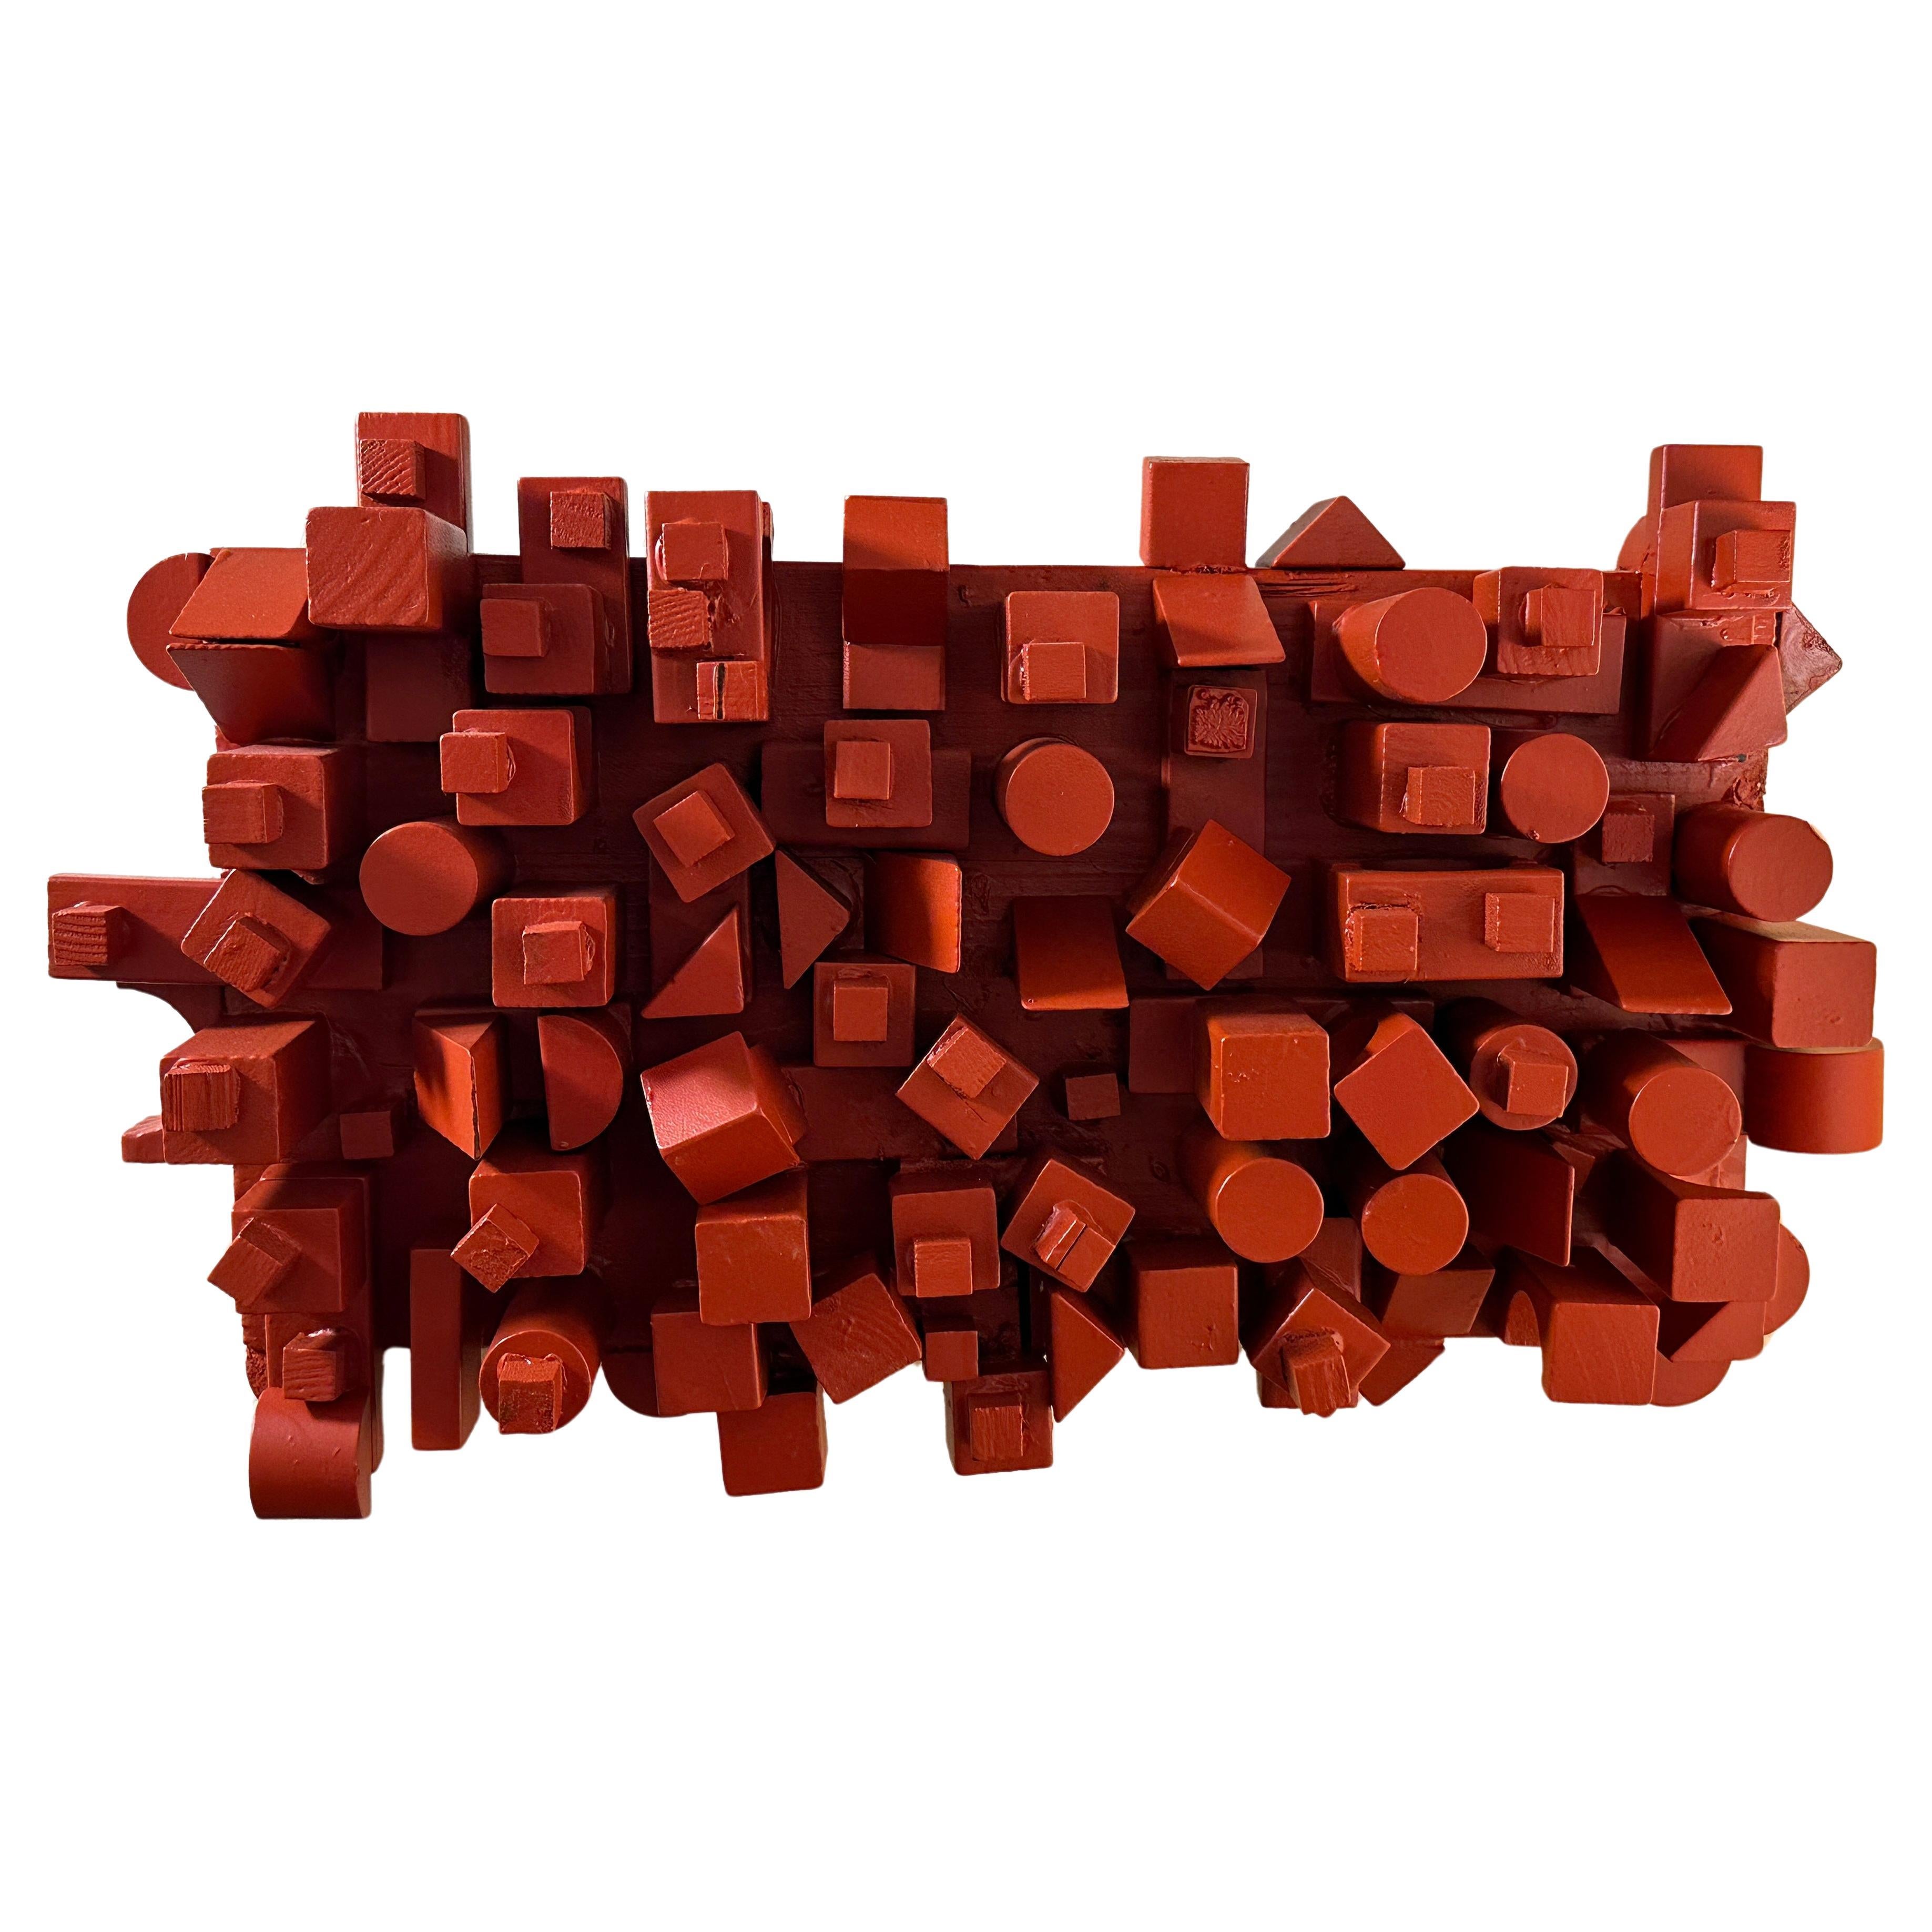 Contemporary Urban Rectangular Red Wall Sculpture by Charles Fultz For Sale